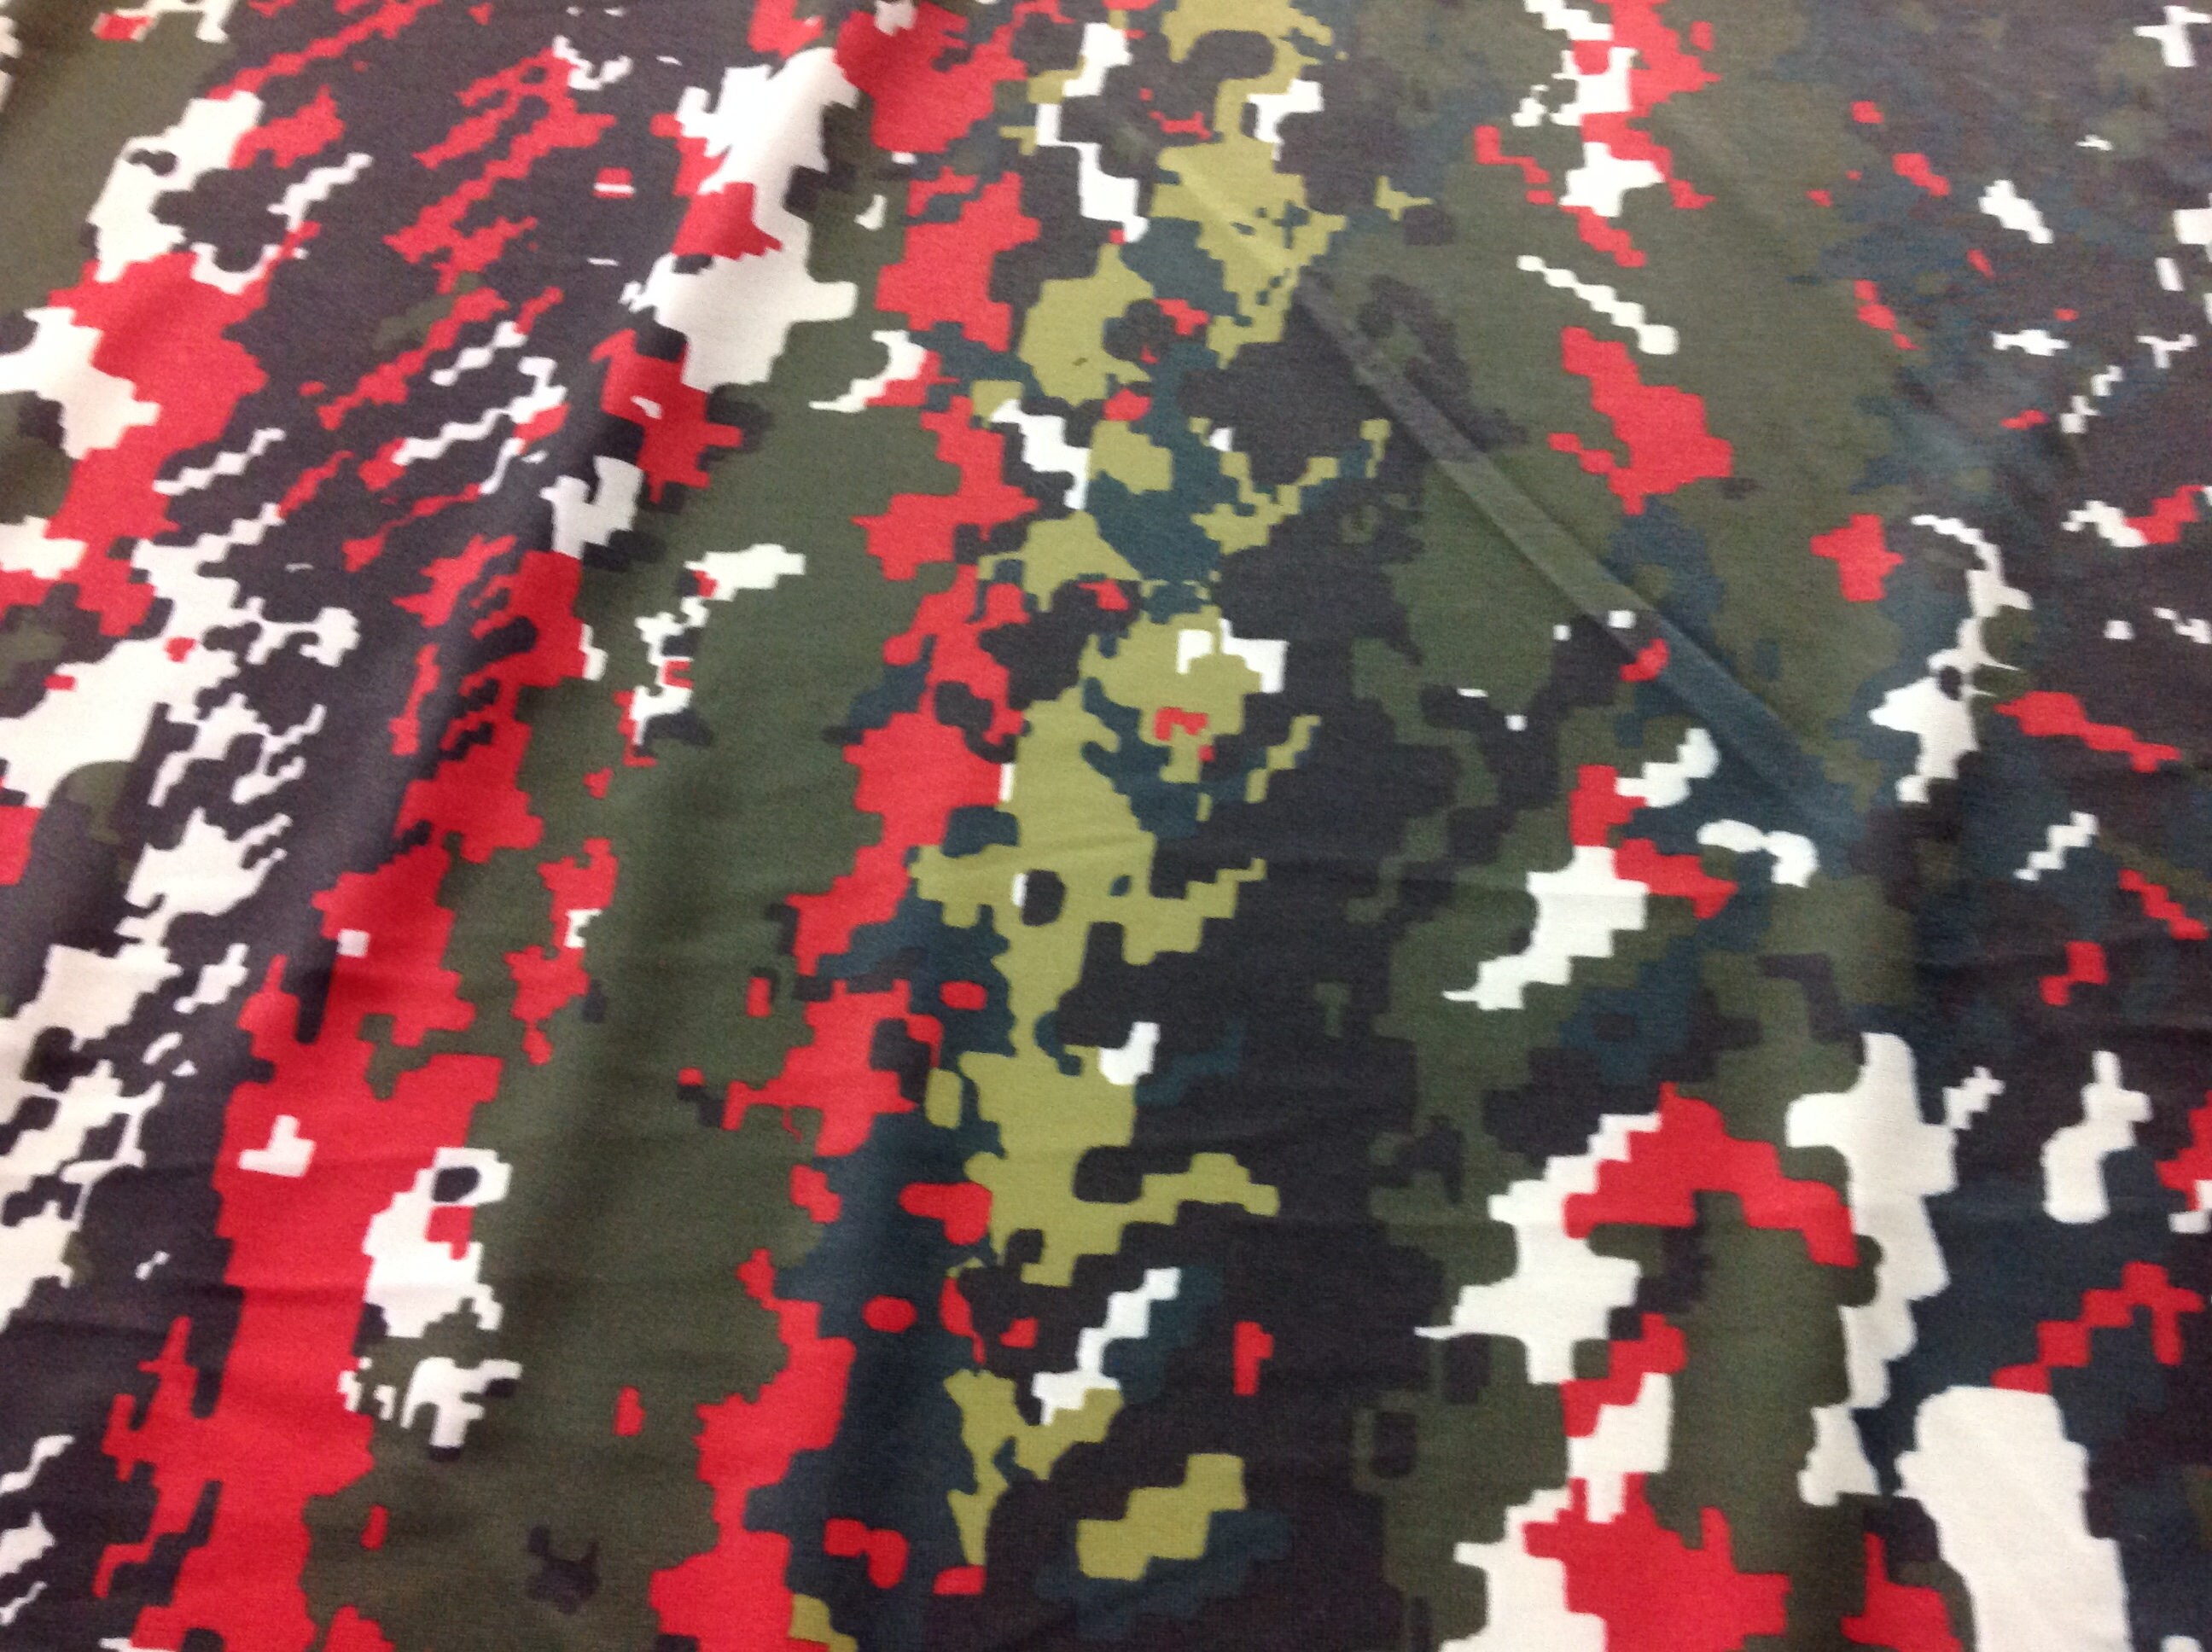 Green Camouflage spandex fabric for costumes/dance/ gymnastics | Etsy